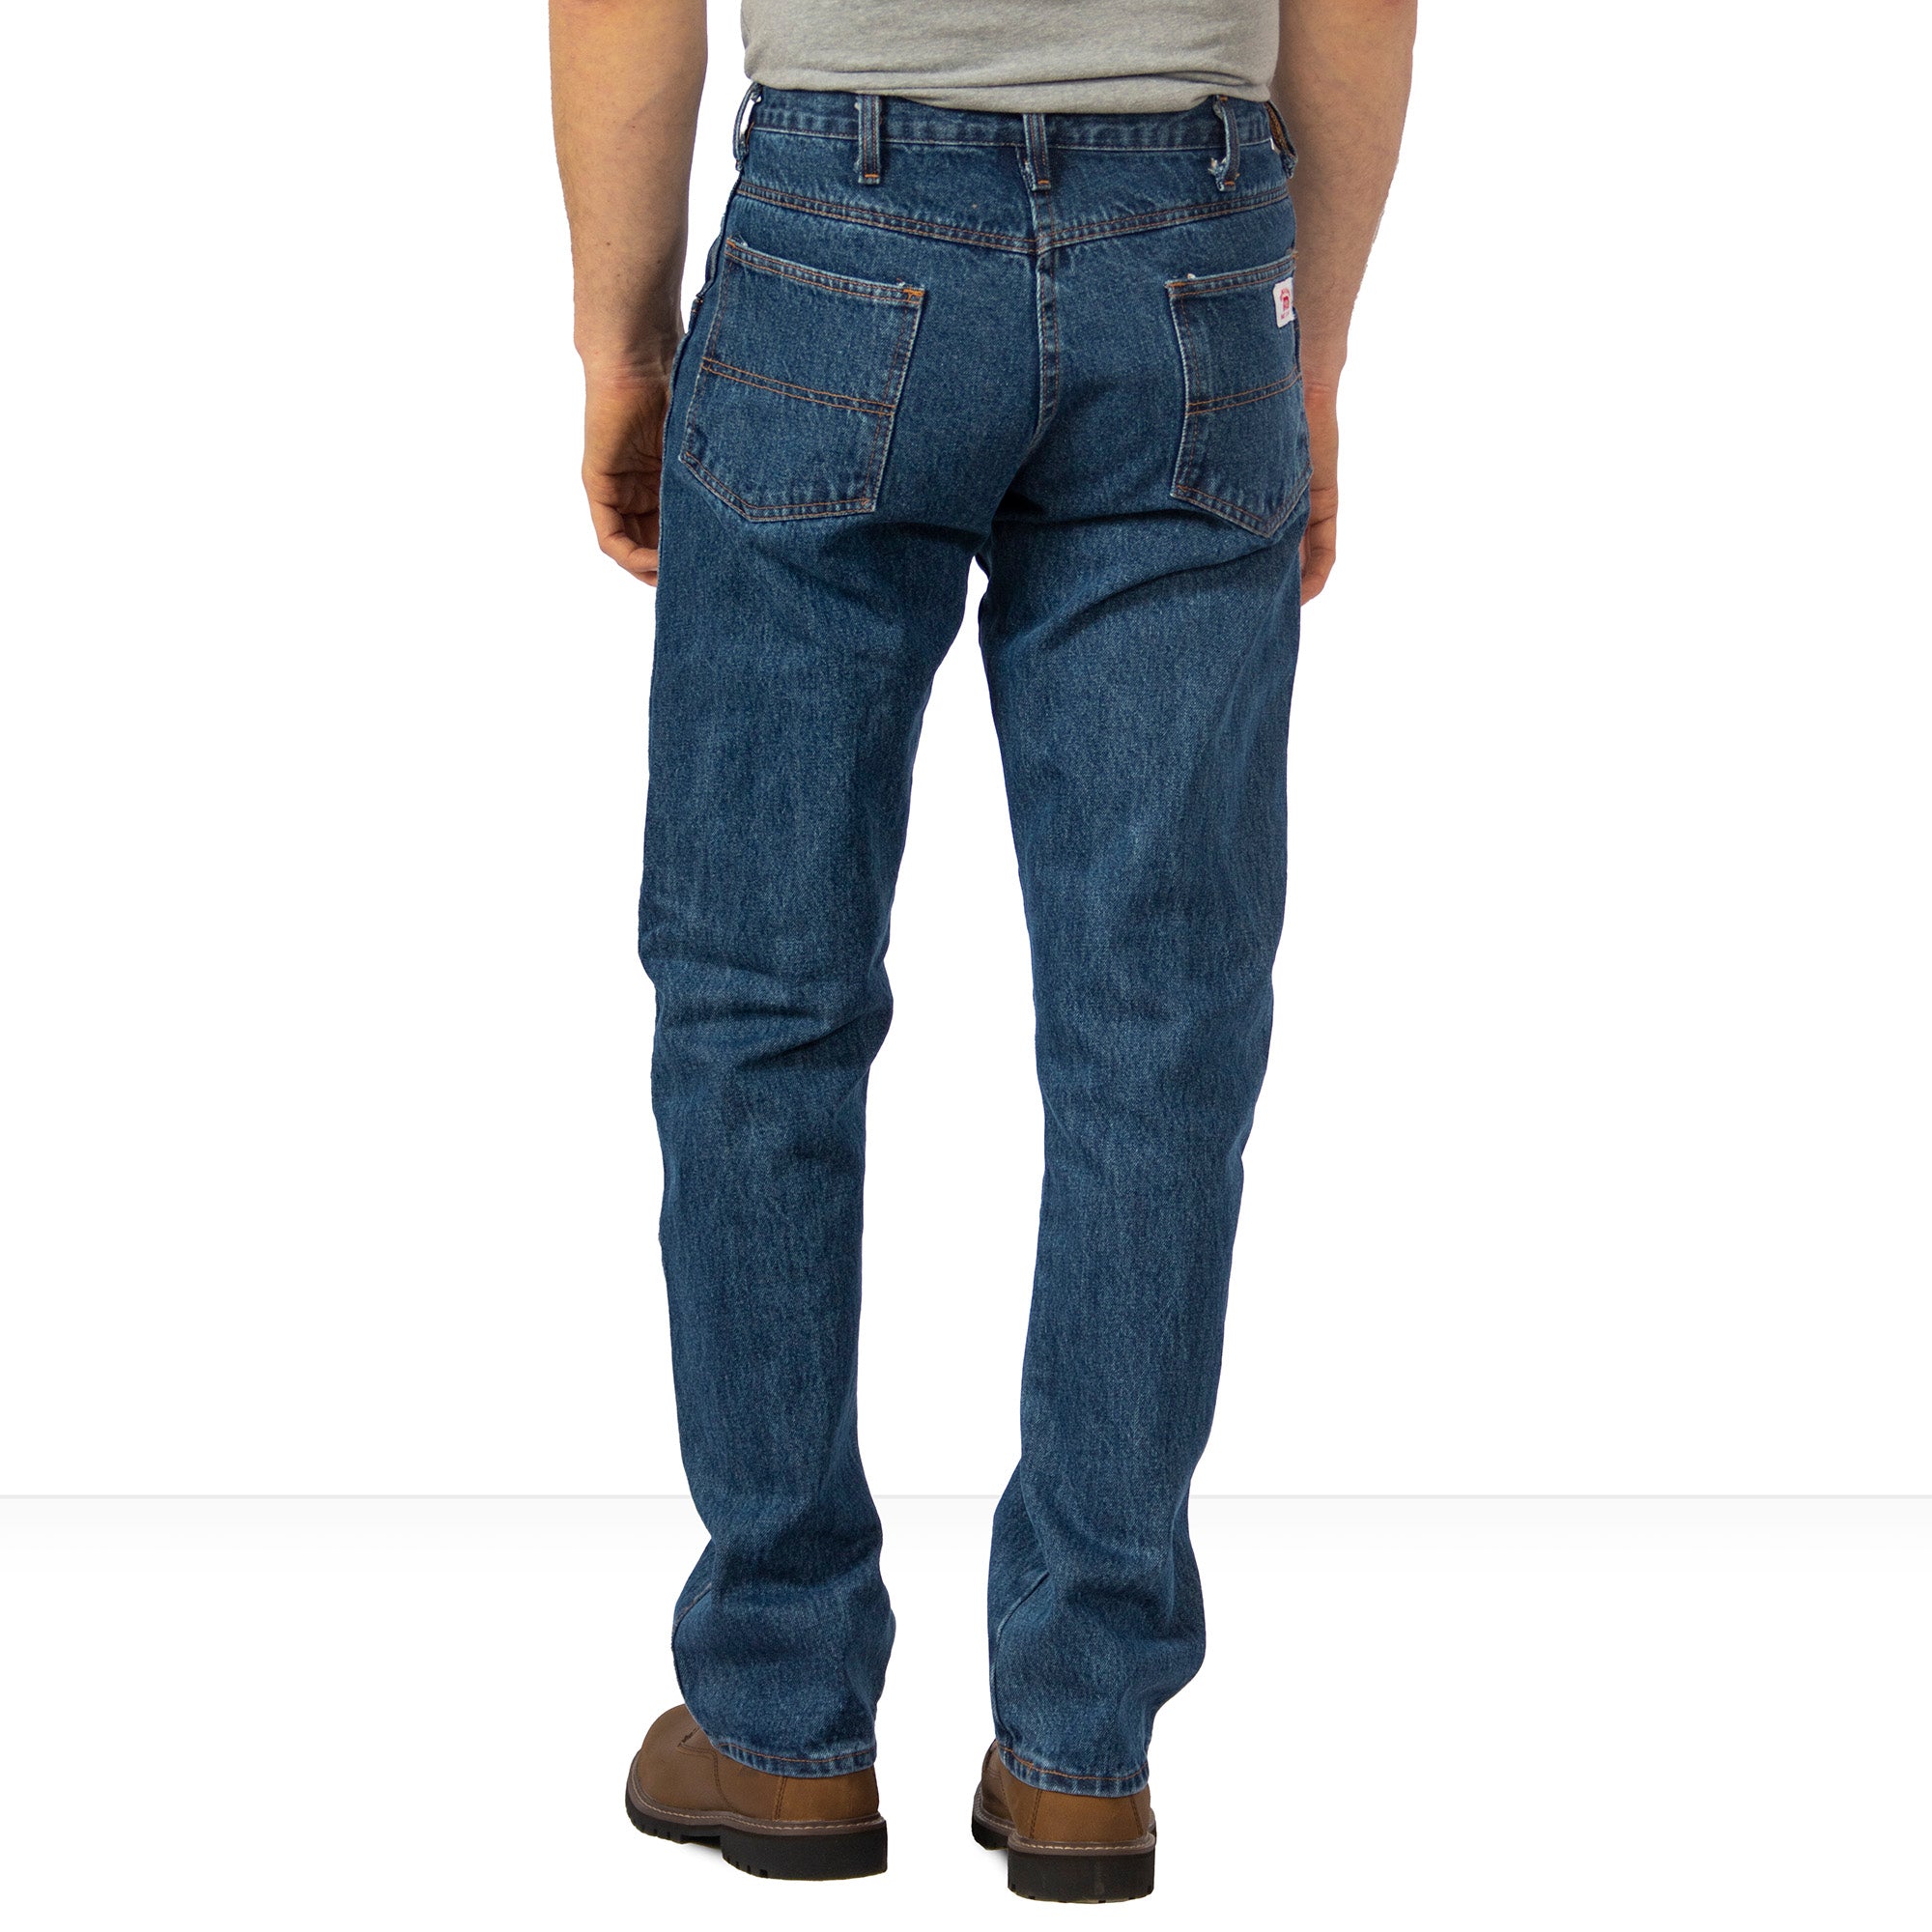 105 American Made Jeans Regular Fit 14 oz 5 Pocket Jeans Made in USA –  Round House American Made Jeans Made in USA Overalls, Workwear